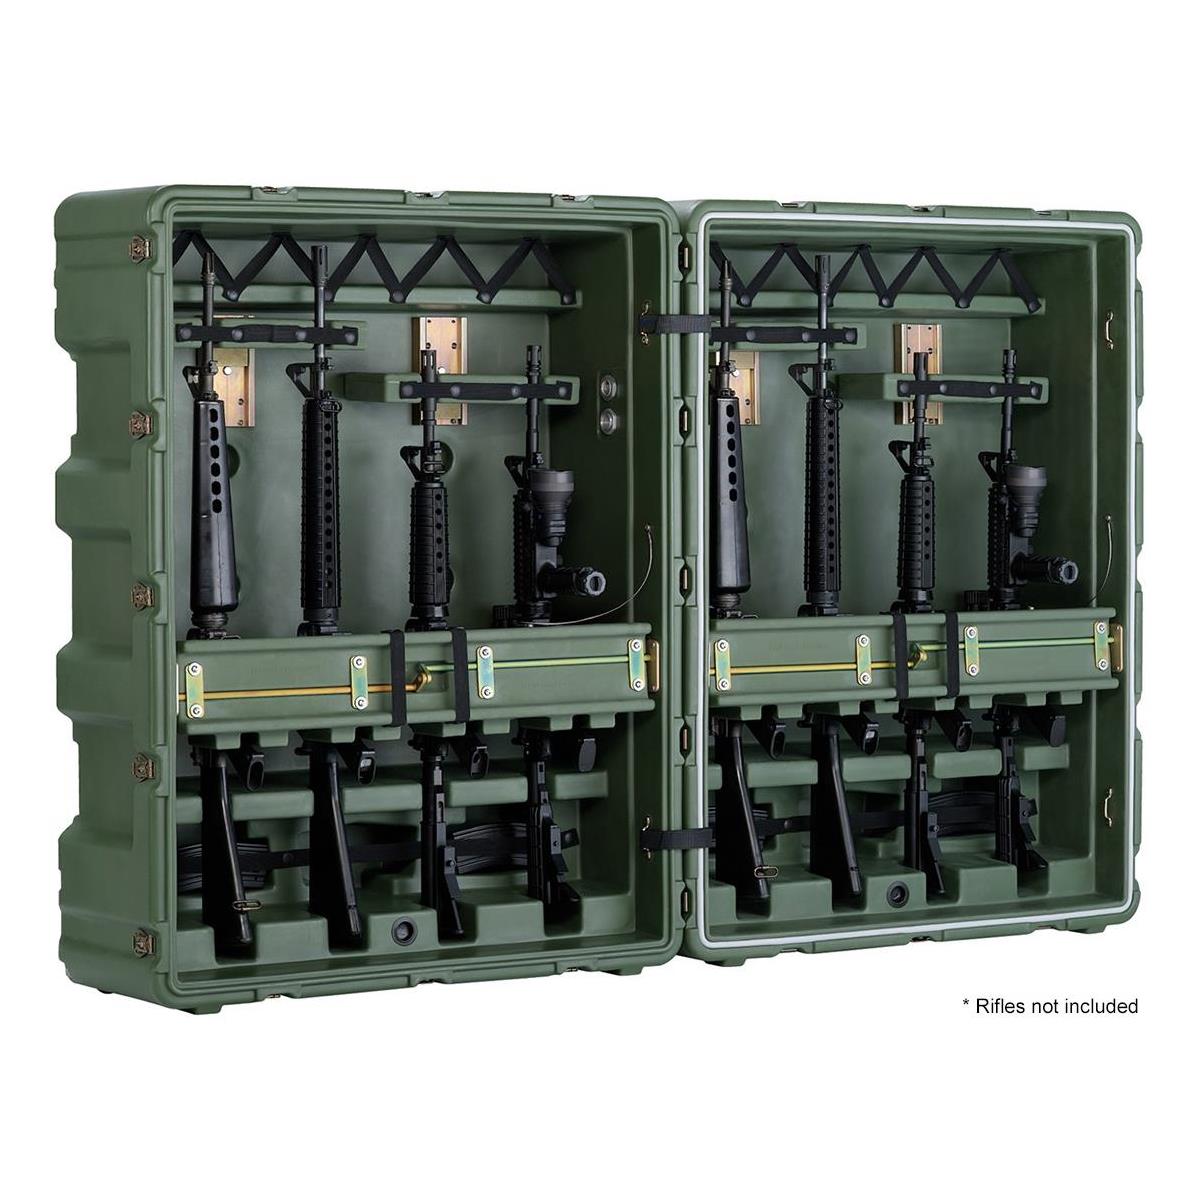 Pelican Case for Eight Rifles, Olive Drab Green -  472-M4-M16-8-137